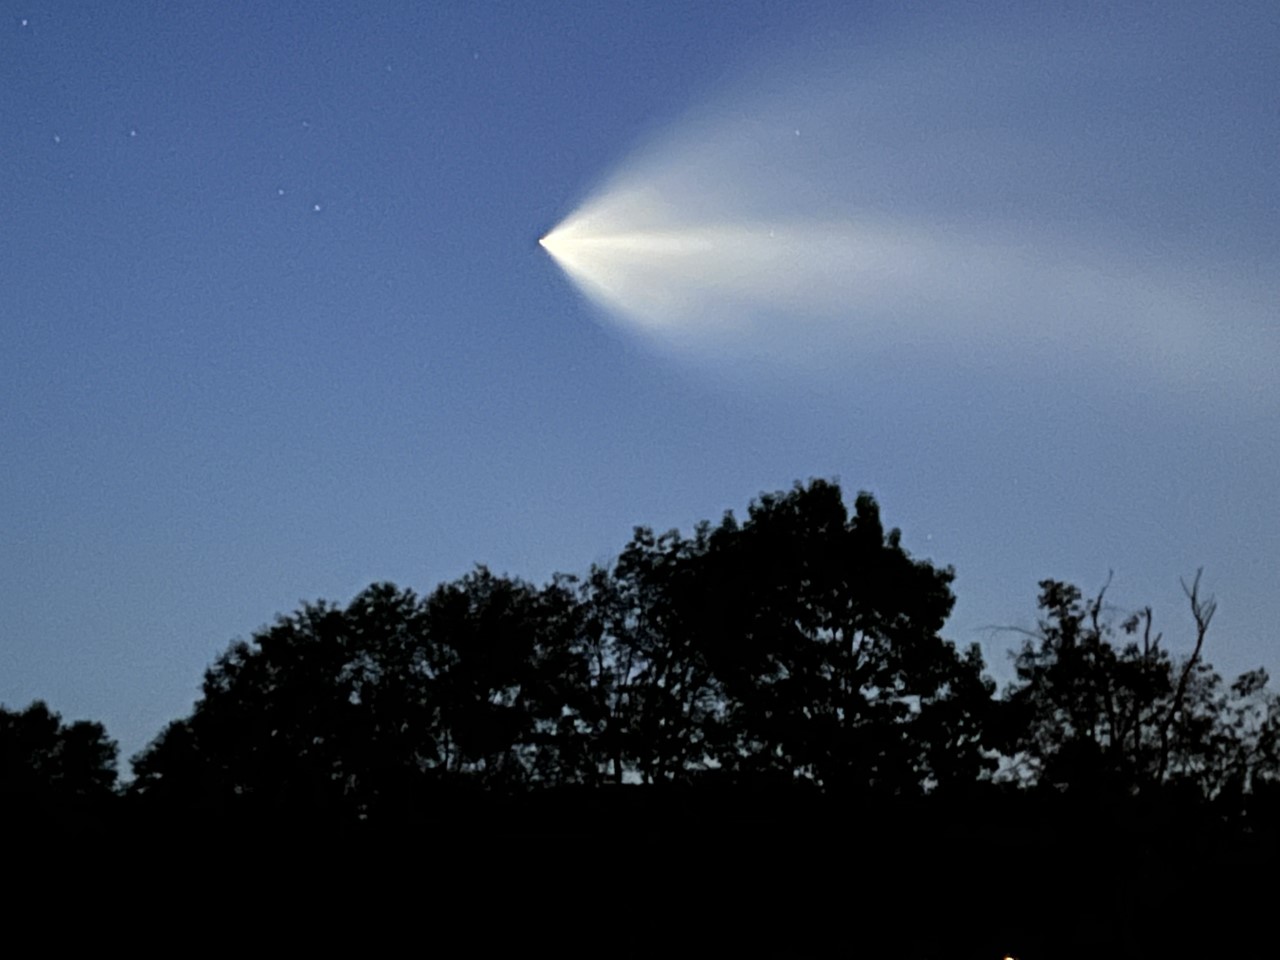 Spotted a bright light in the sky Saturday night? It's not a meteor.